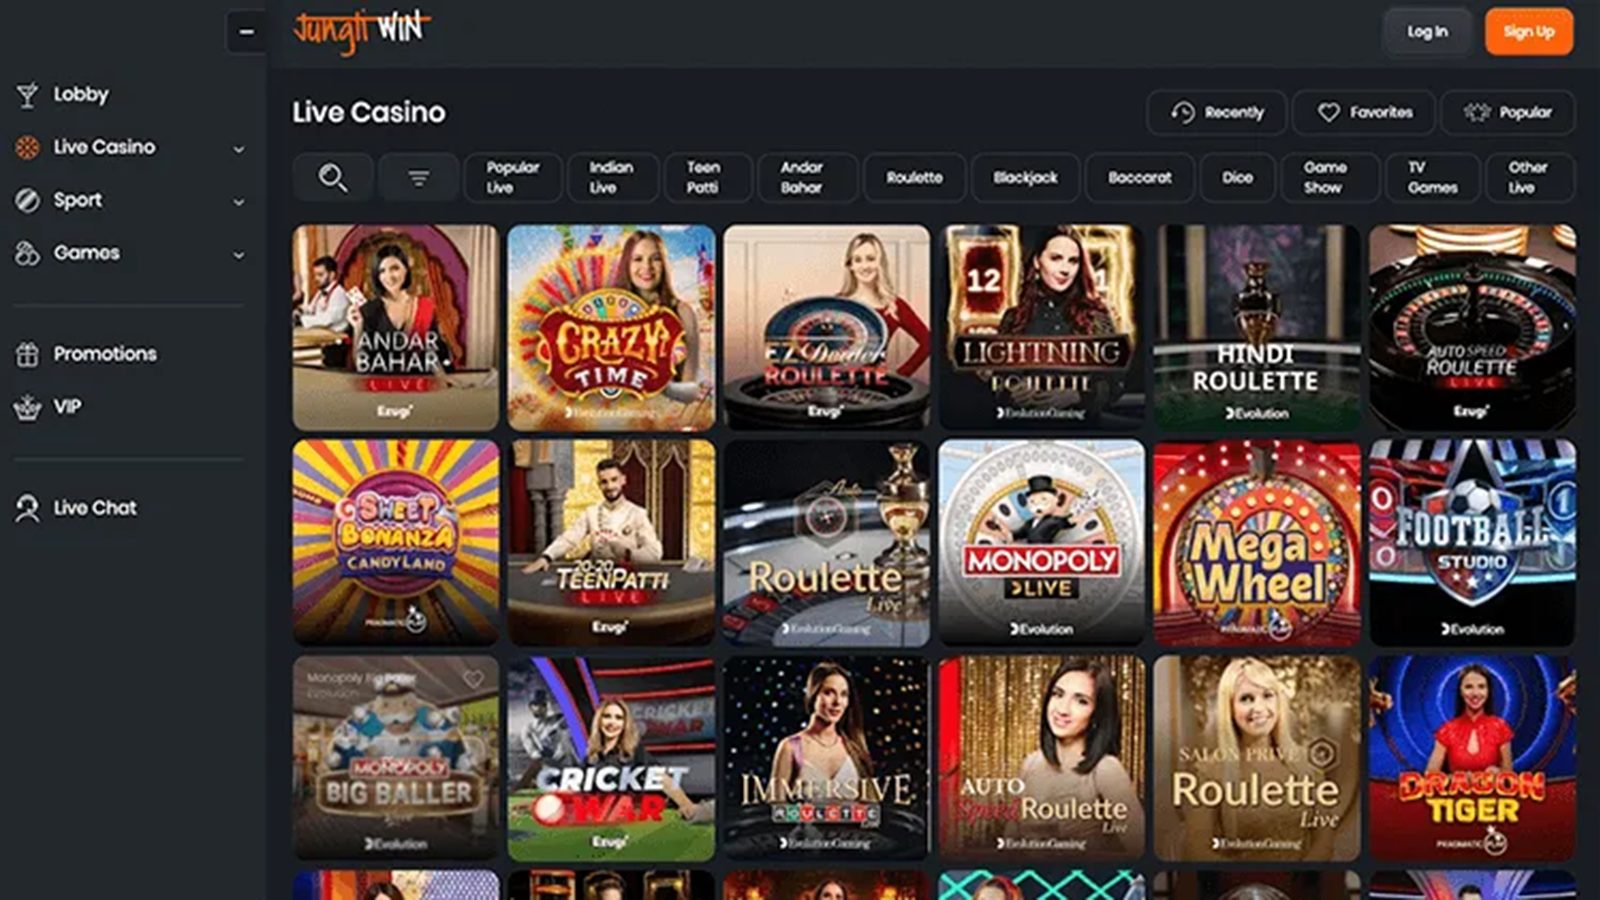 Review of JungliWIN Casino